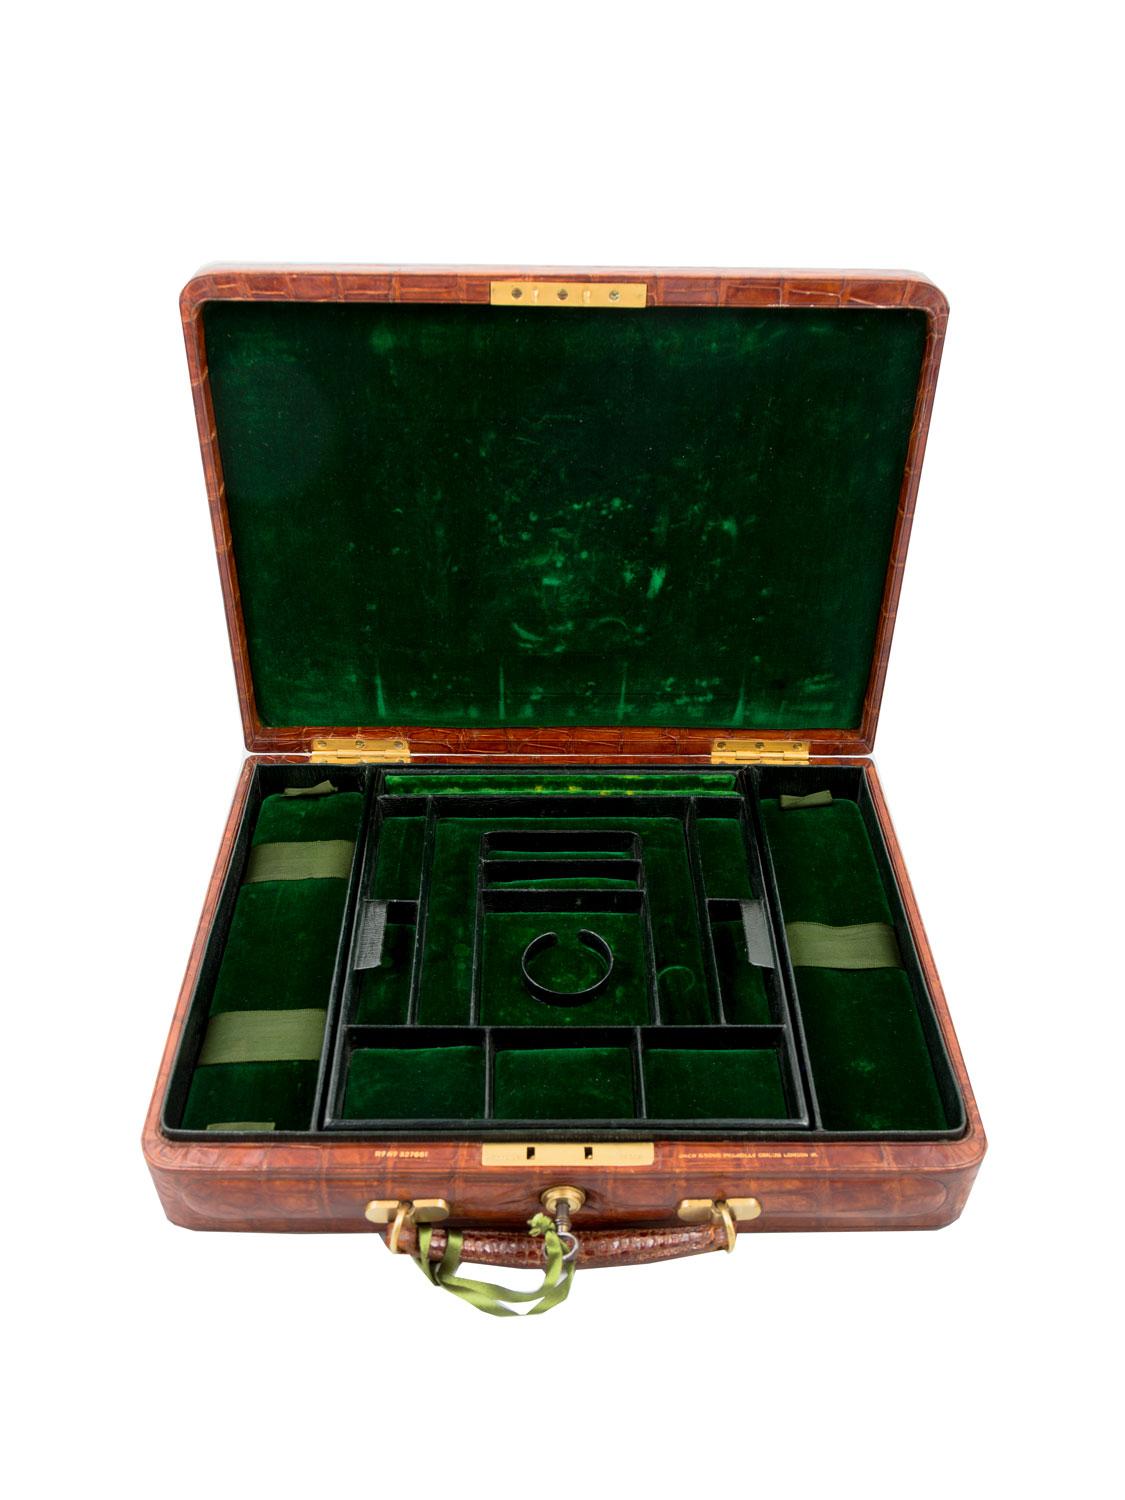 Early 20th Century Crocodile Jewelry Case by Drew & Sons, English, circa 1900